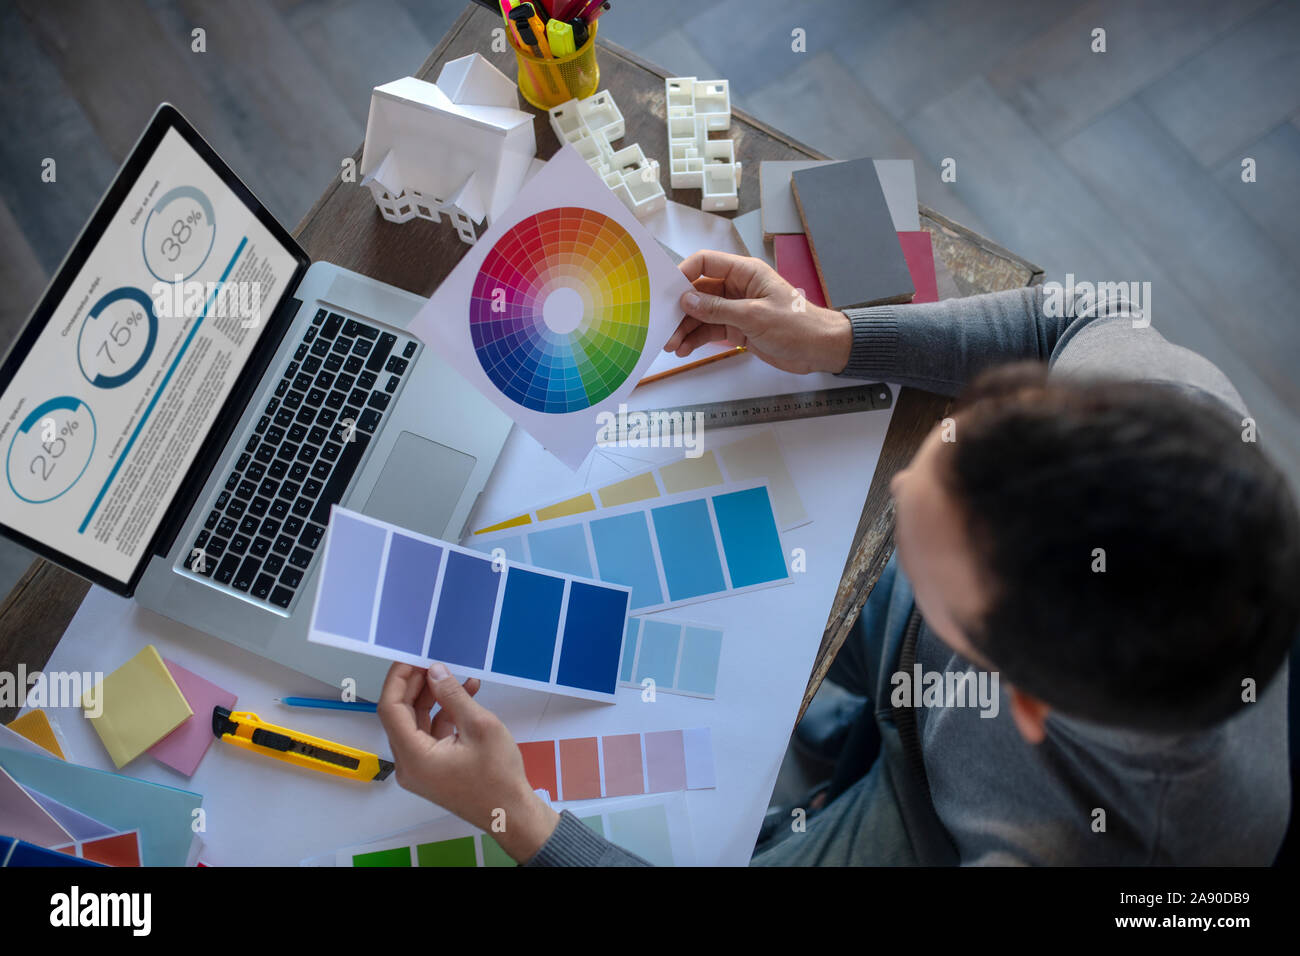 Top view of interior designer choosing color for project Stock Photo